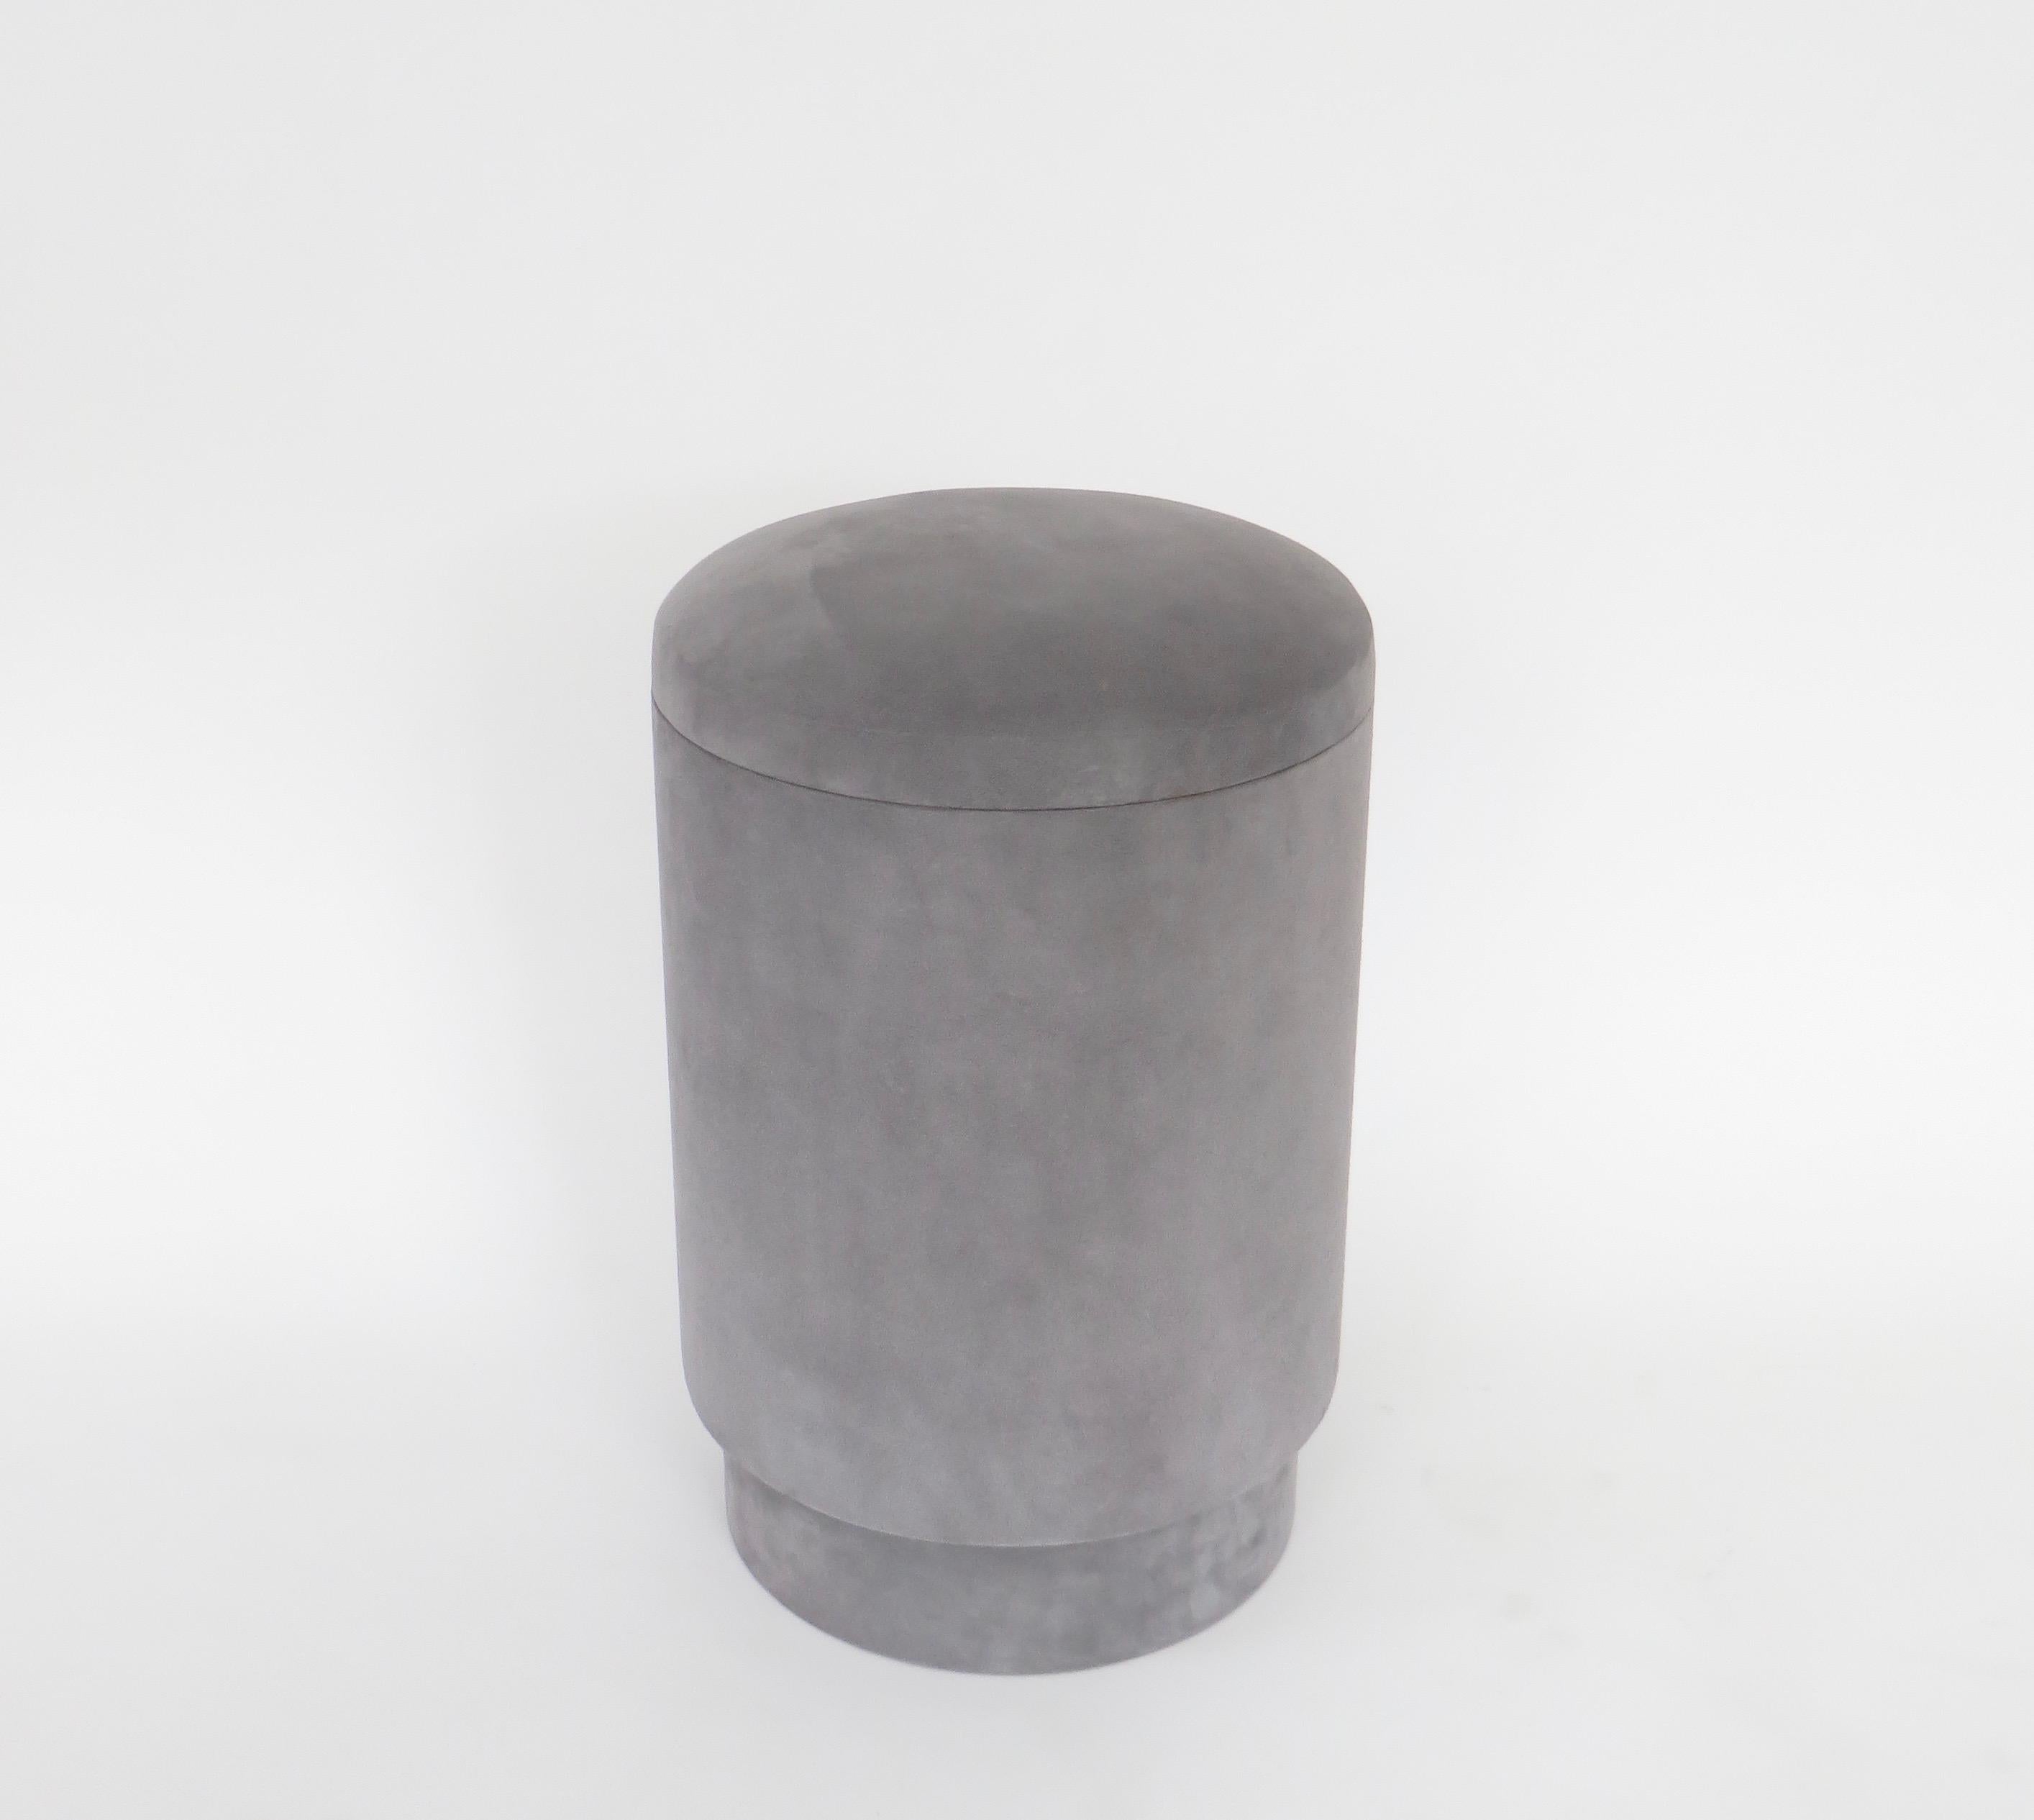 A Michael Verheyden pouf or tabou or stool with storage available in various colors. Shown is the color light gray. 
Pouf with storage space is covered in the most beautiful suede. The interior is lined in black suede. 
Michael Verheyden is a